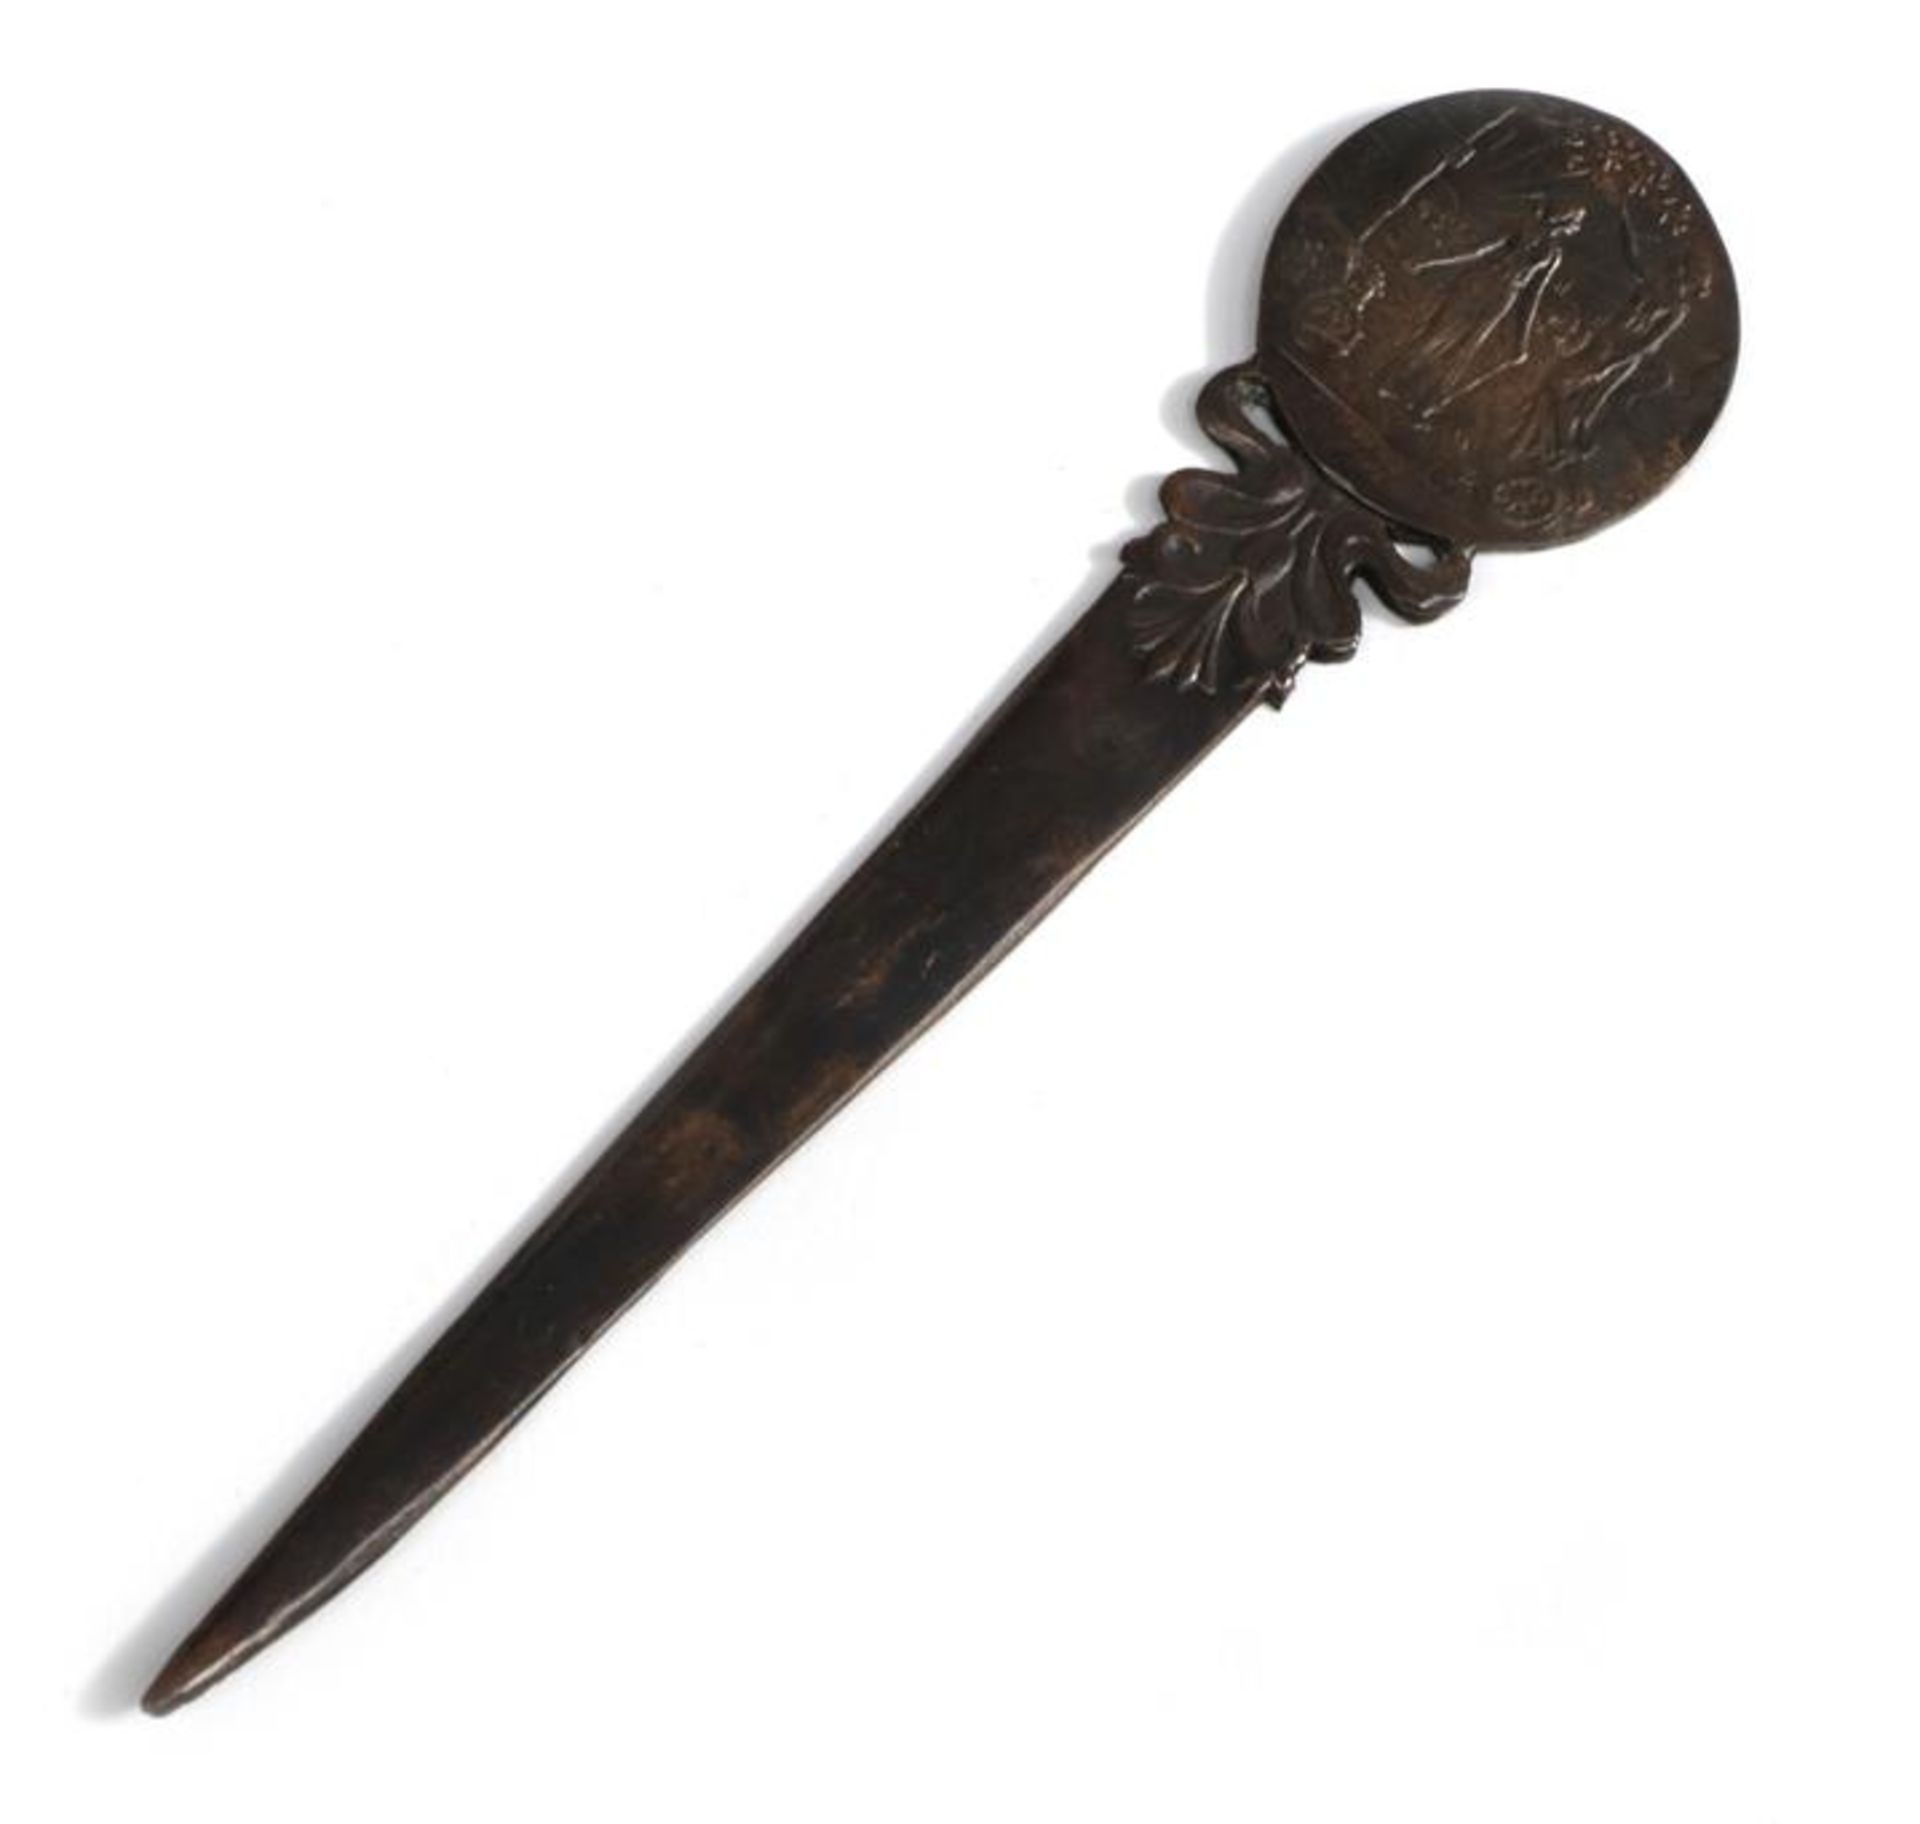 An Early 20th Century Double-Sided Bronze Paperknife, inscribed with De Dion Bouton Marque Deposee